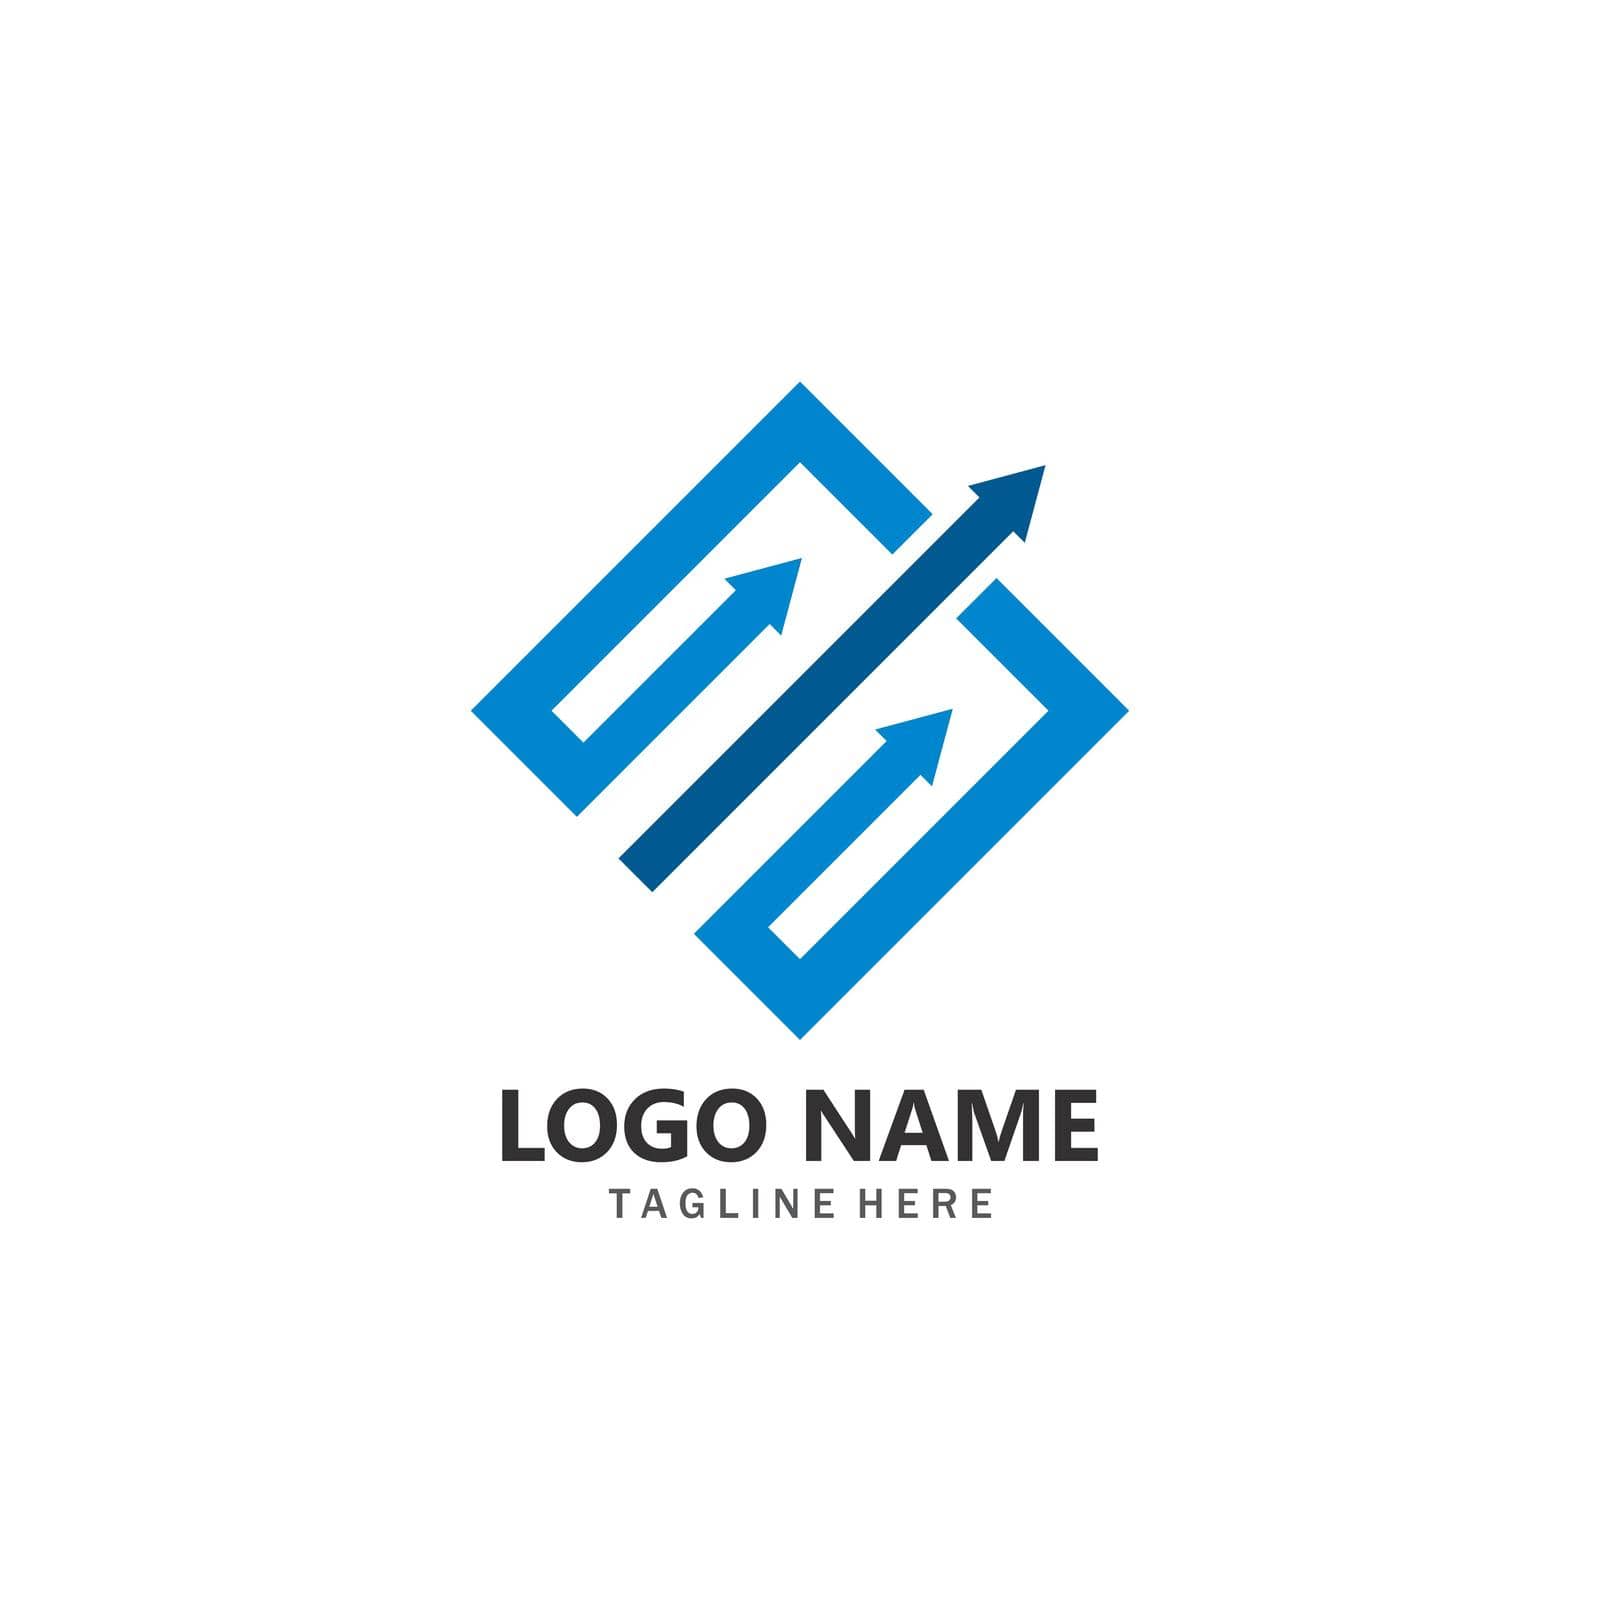 Business Finance professional logo template vector by kosasihindra55